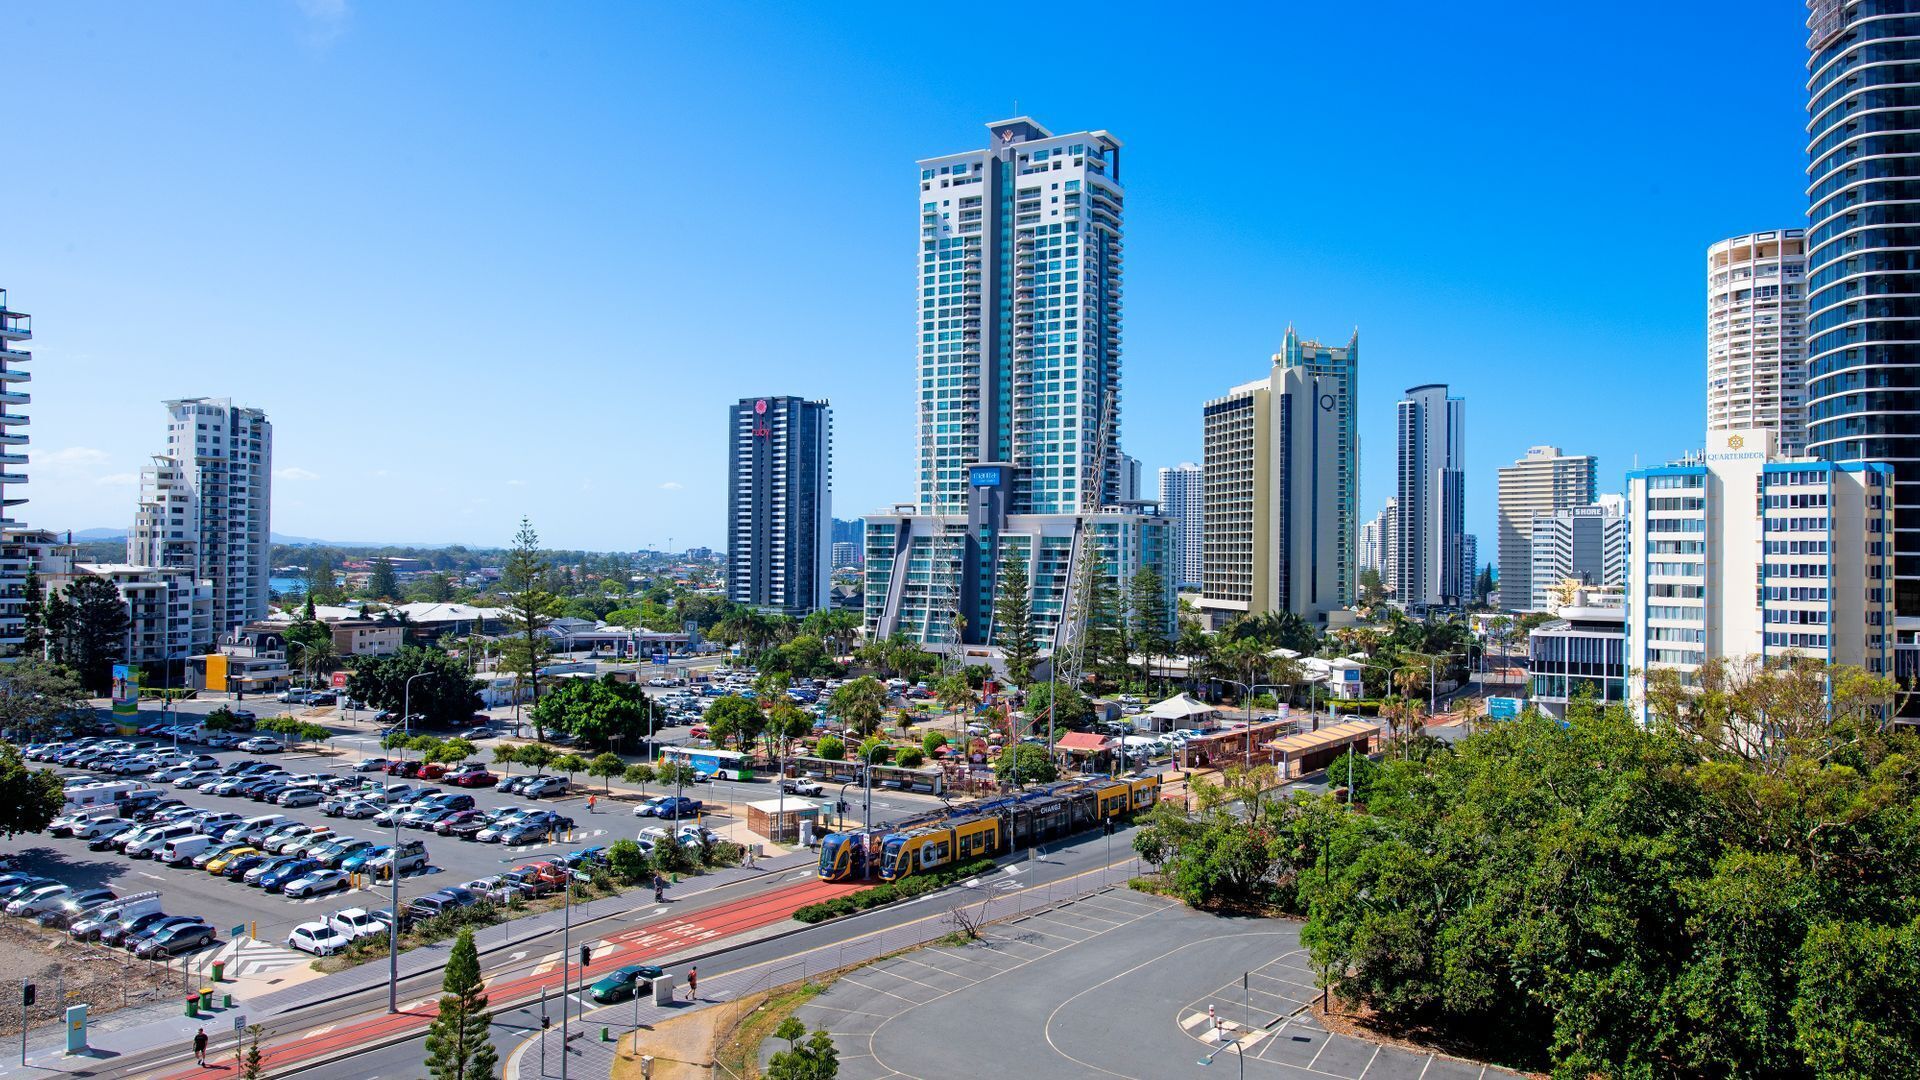 Mantra on View - In the Heart of Surfers Paradise